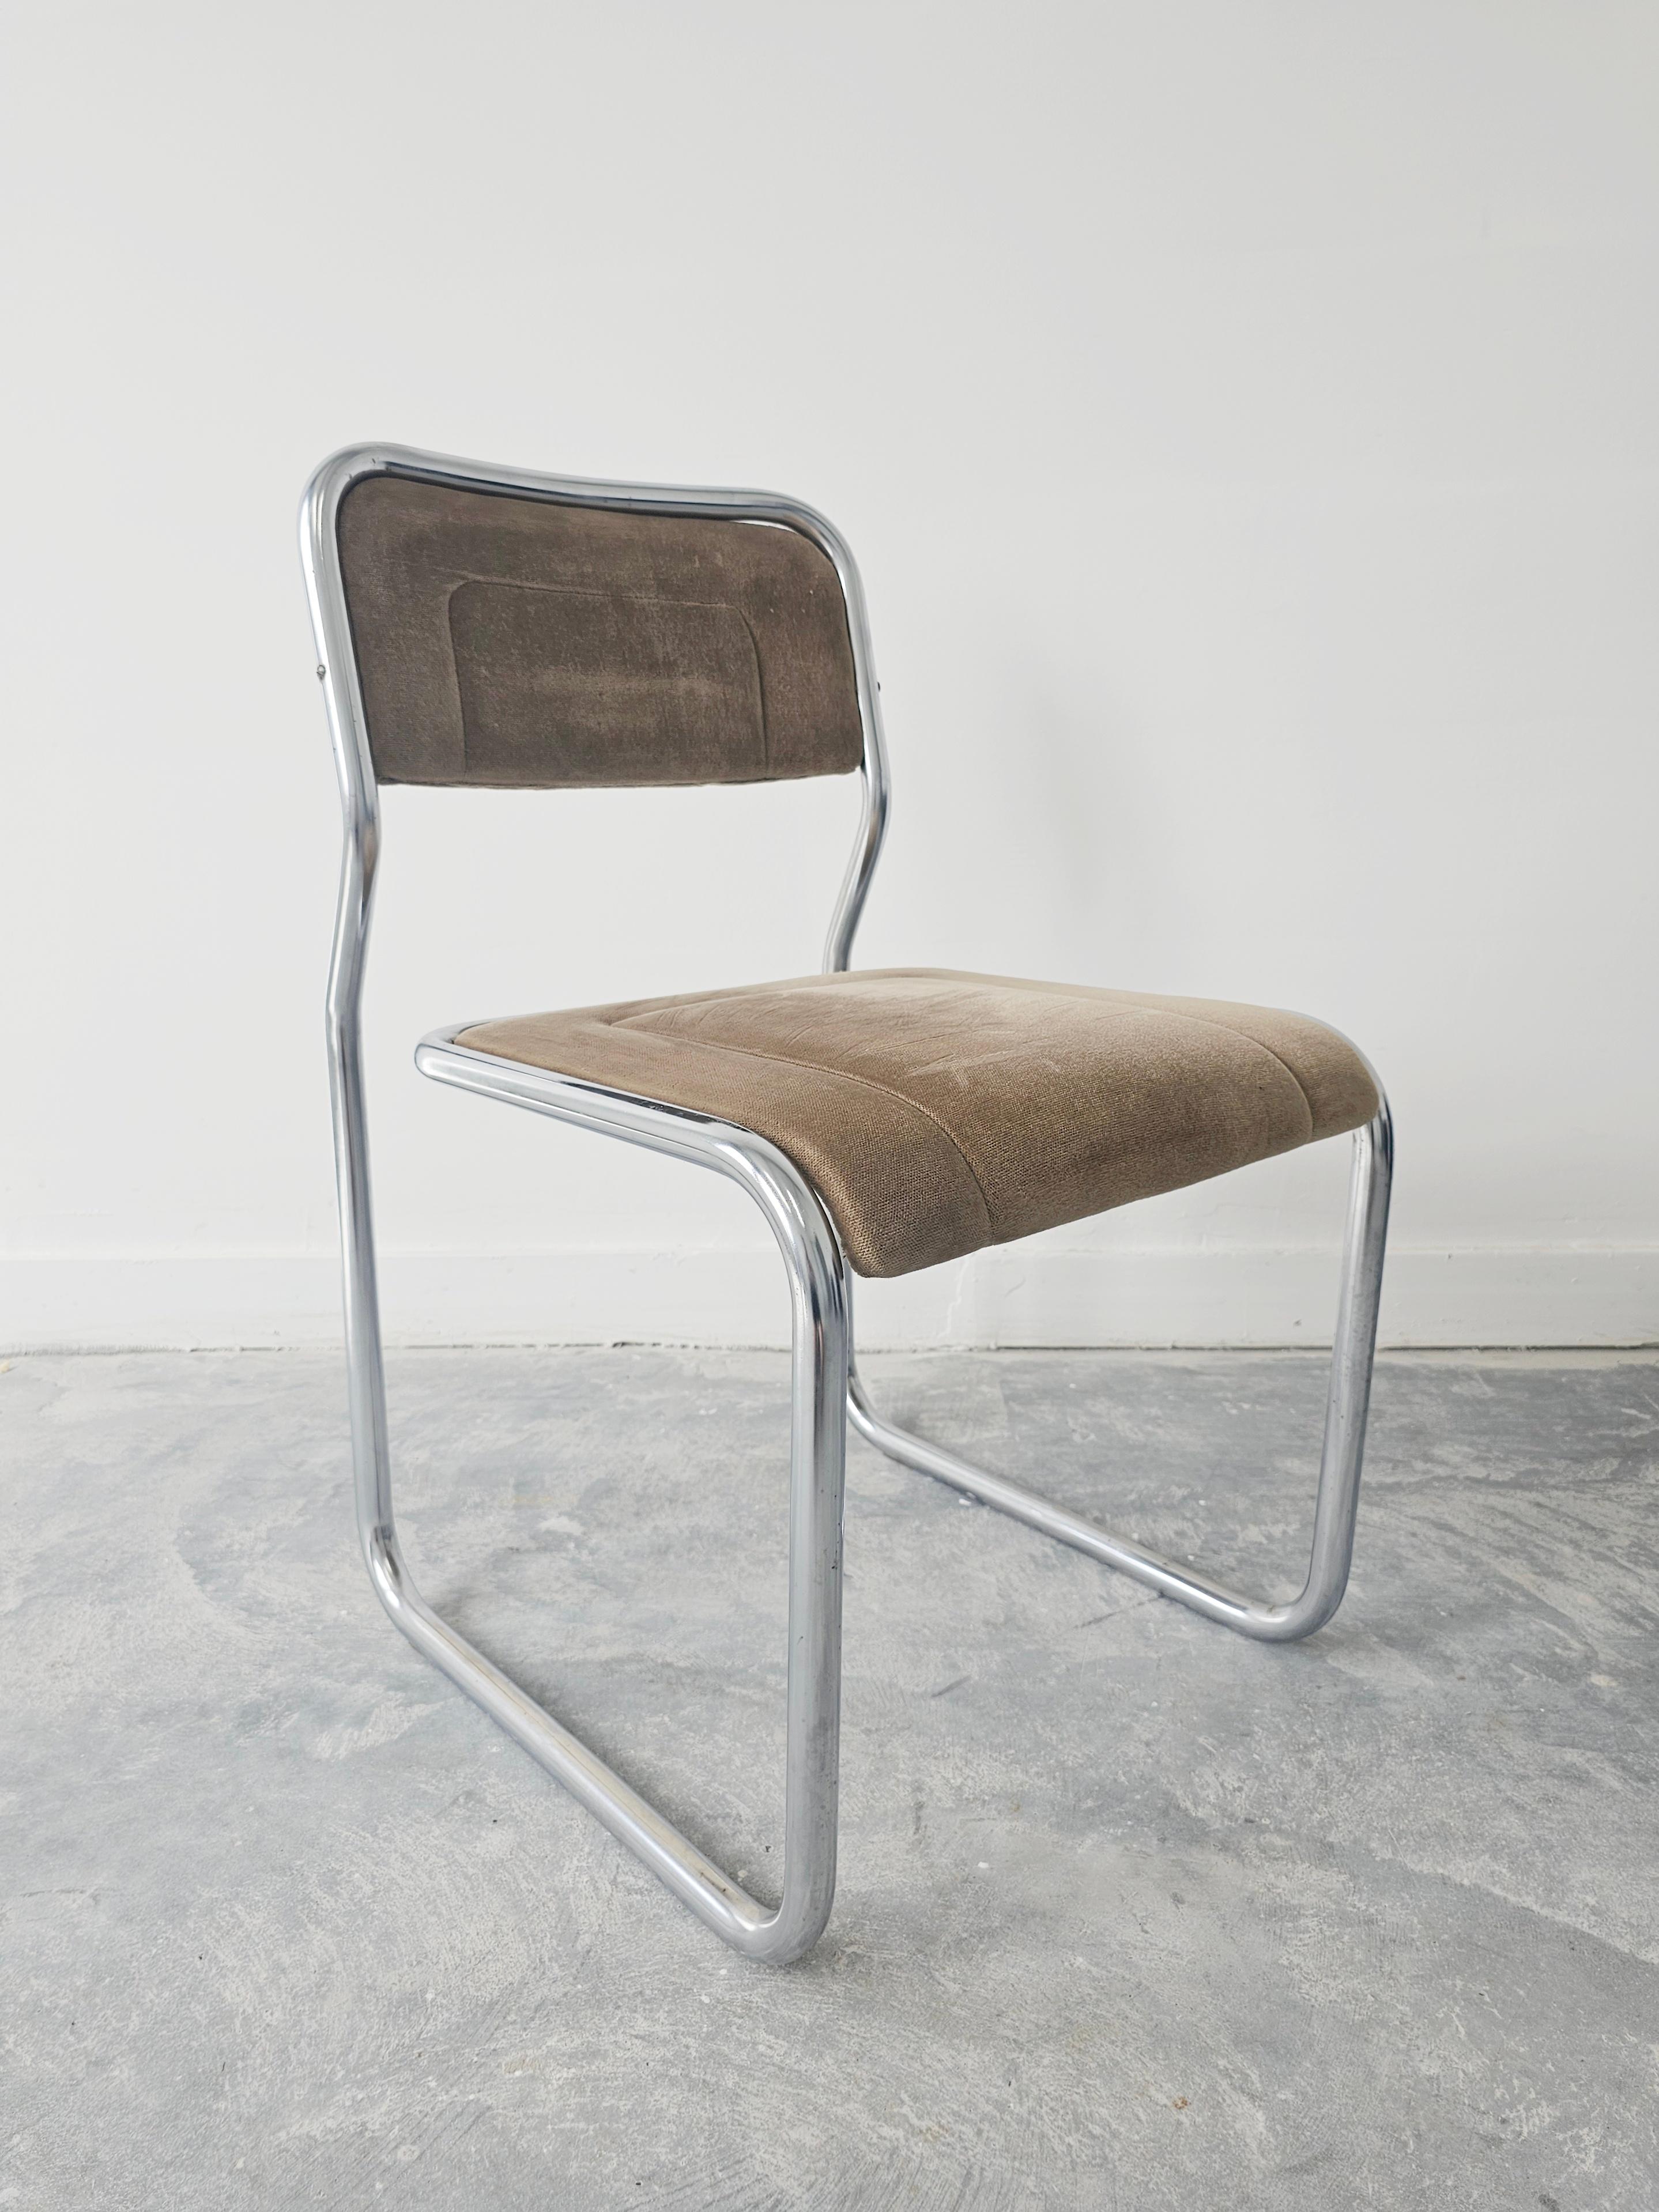 Bauhaus Cantilever Dining Chair with Infinity Frame, Italy 1970s For Sale 6